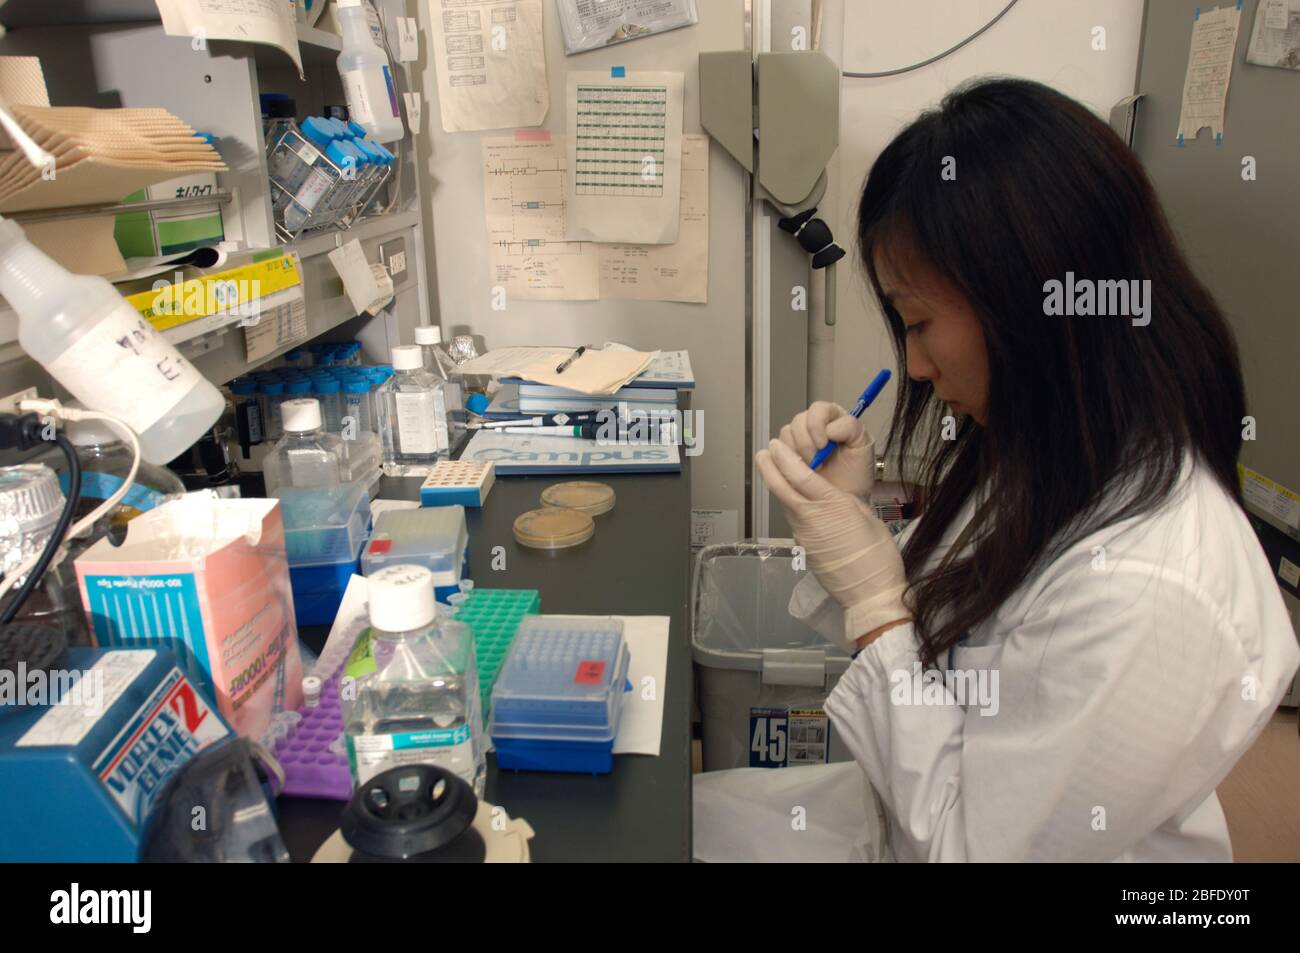 A technician in a laboratory at the Institute for Frontier Medical Sciences, Kyoto University, Japan preparing induced puripotent stem cells for anima Stock Photo